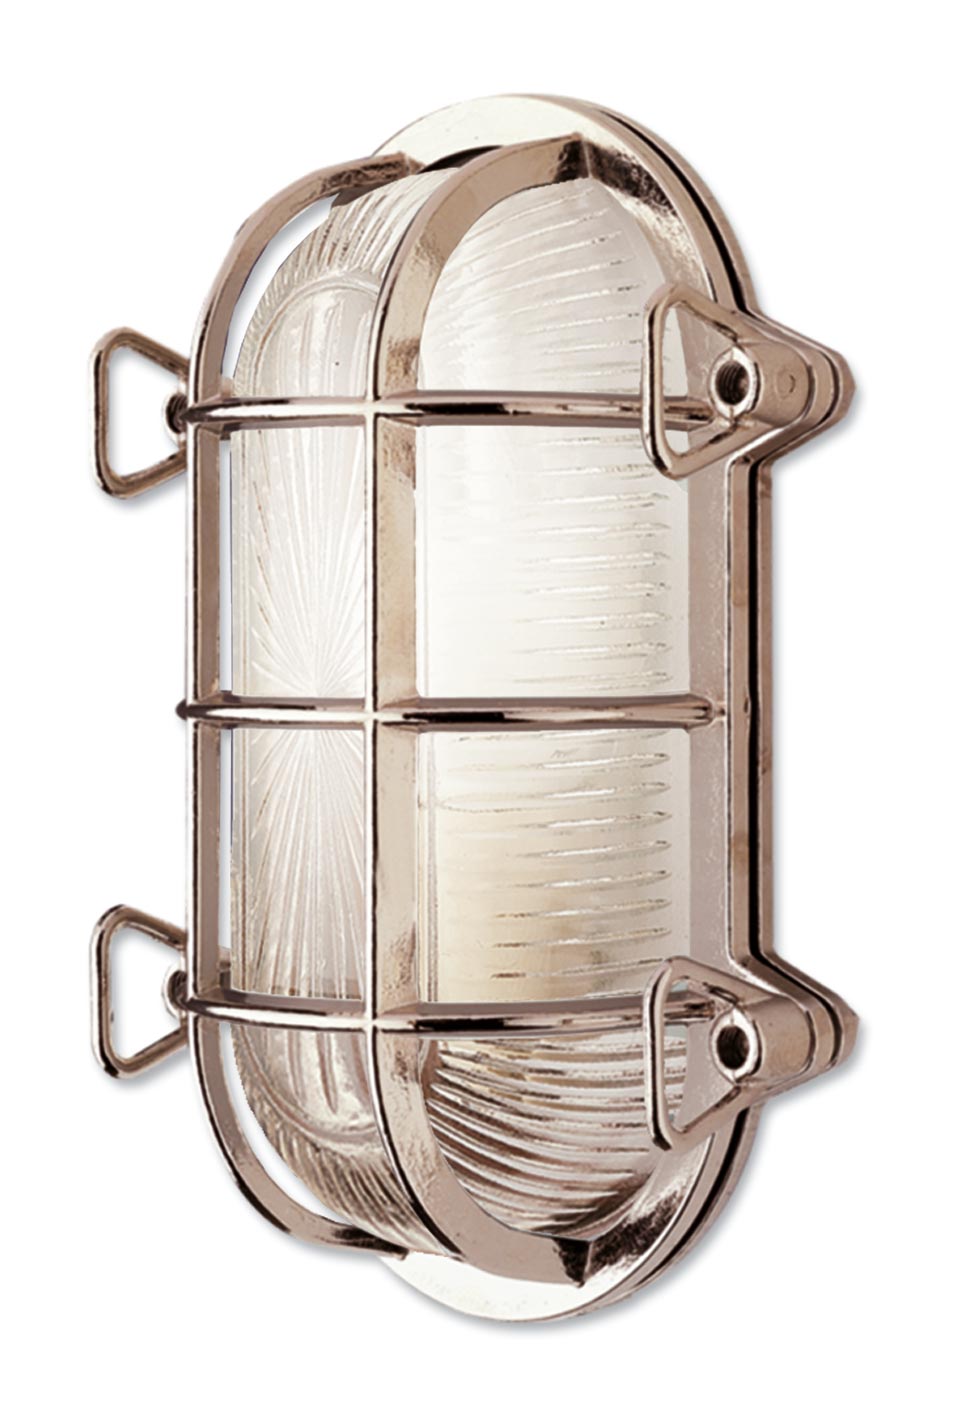 Tortuga oval exterior wall light with silver finish. Moretti Luce. 